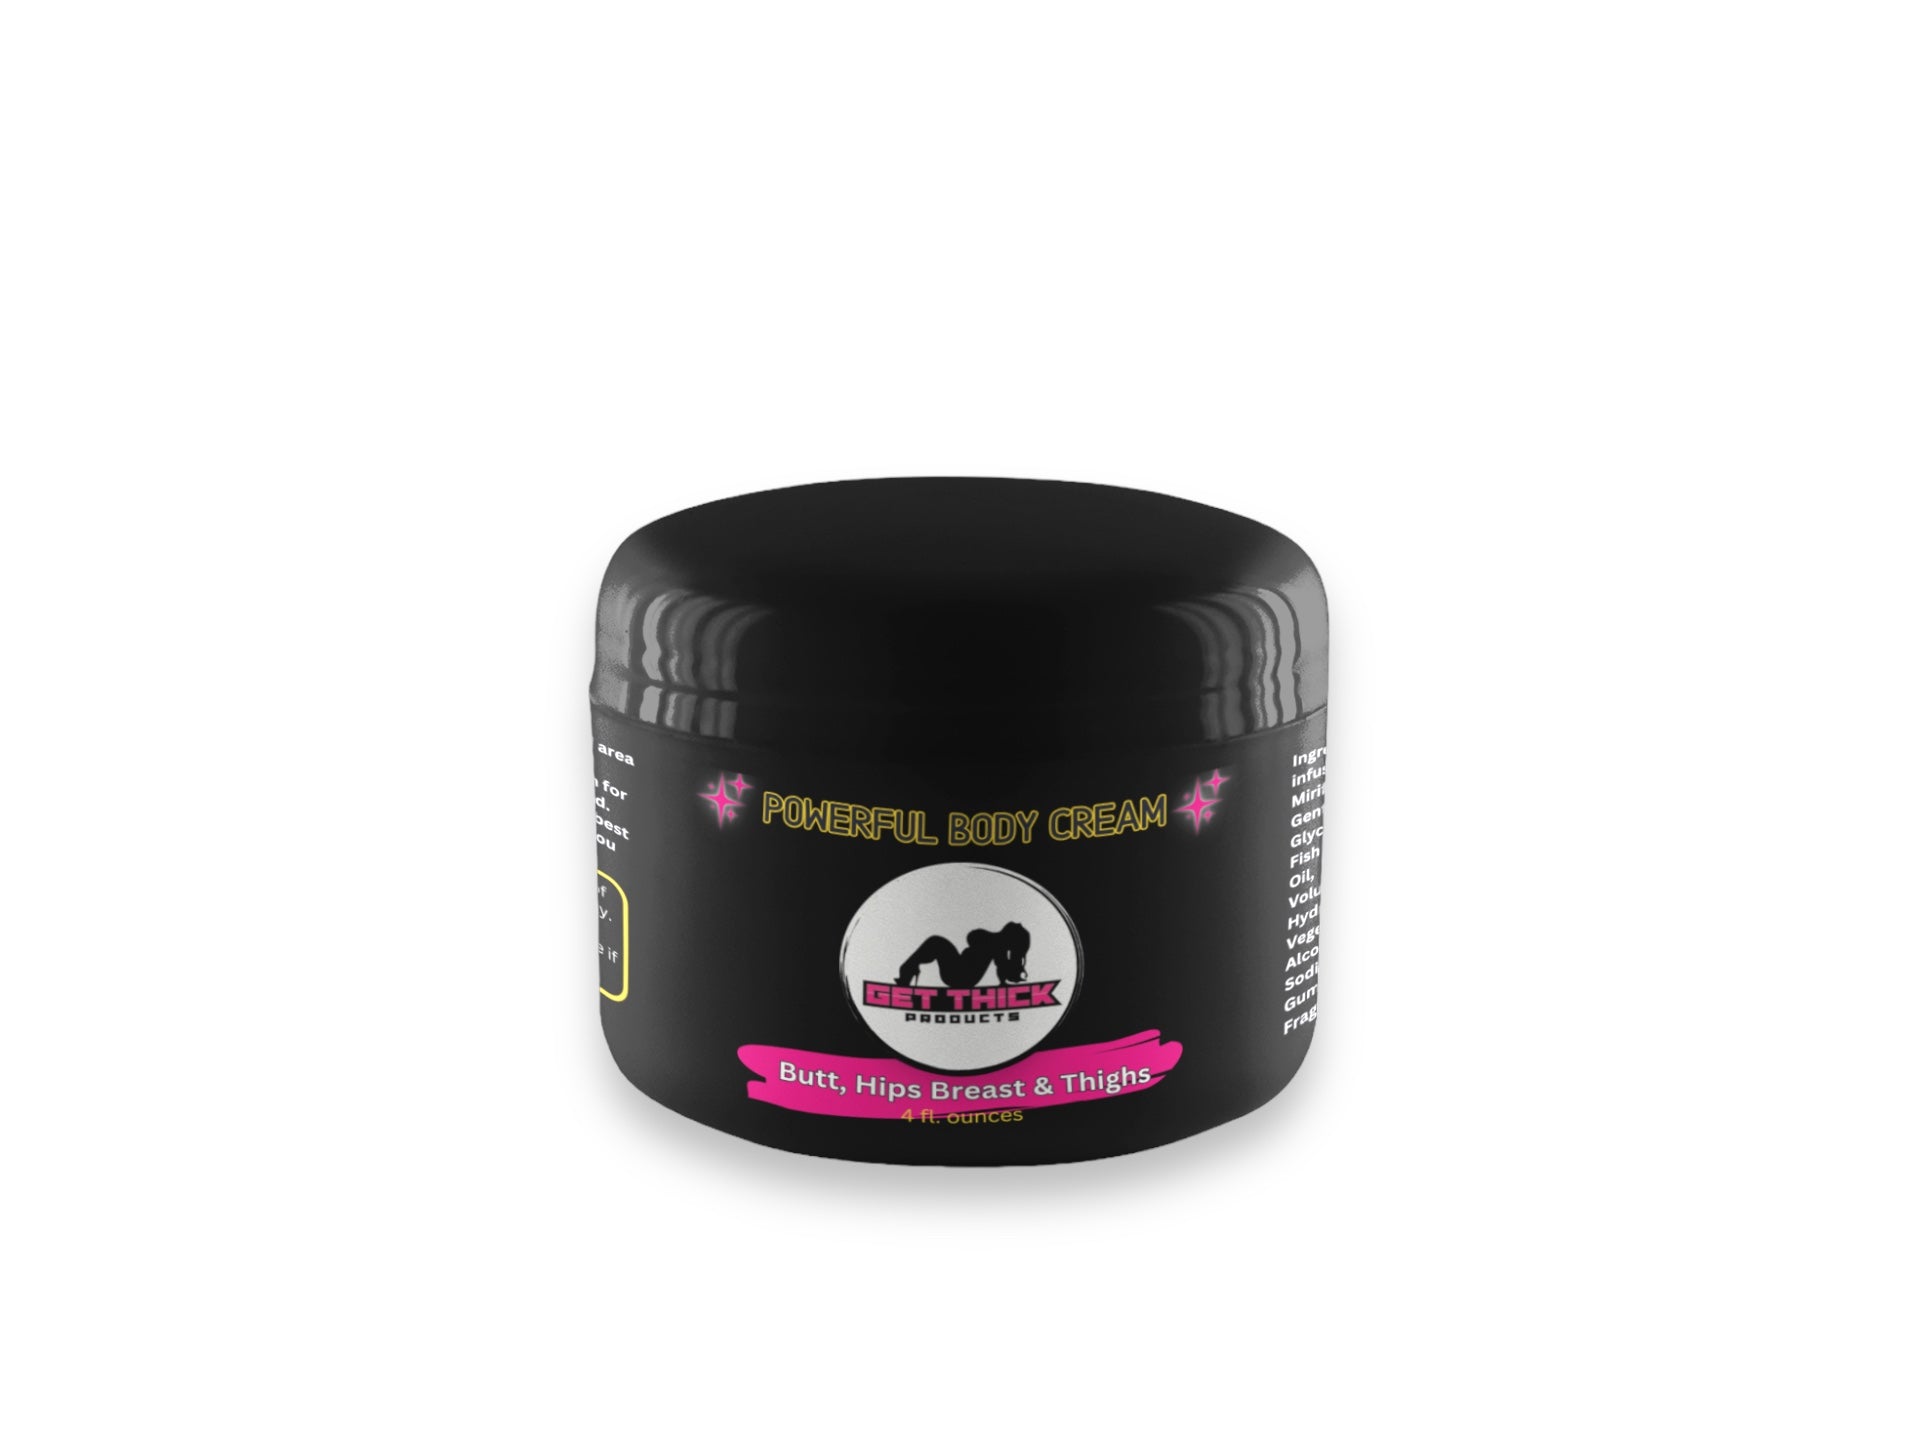 Get Thick Quick Cream 4oz - bigger butt. breast, thighs - Get Thick Products